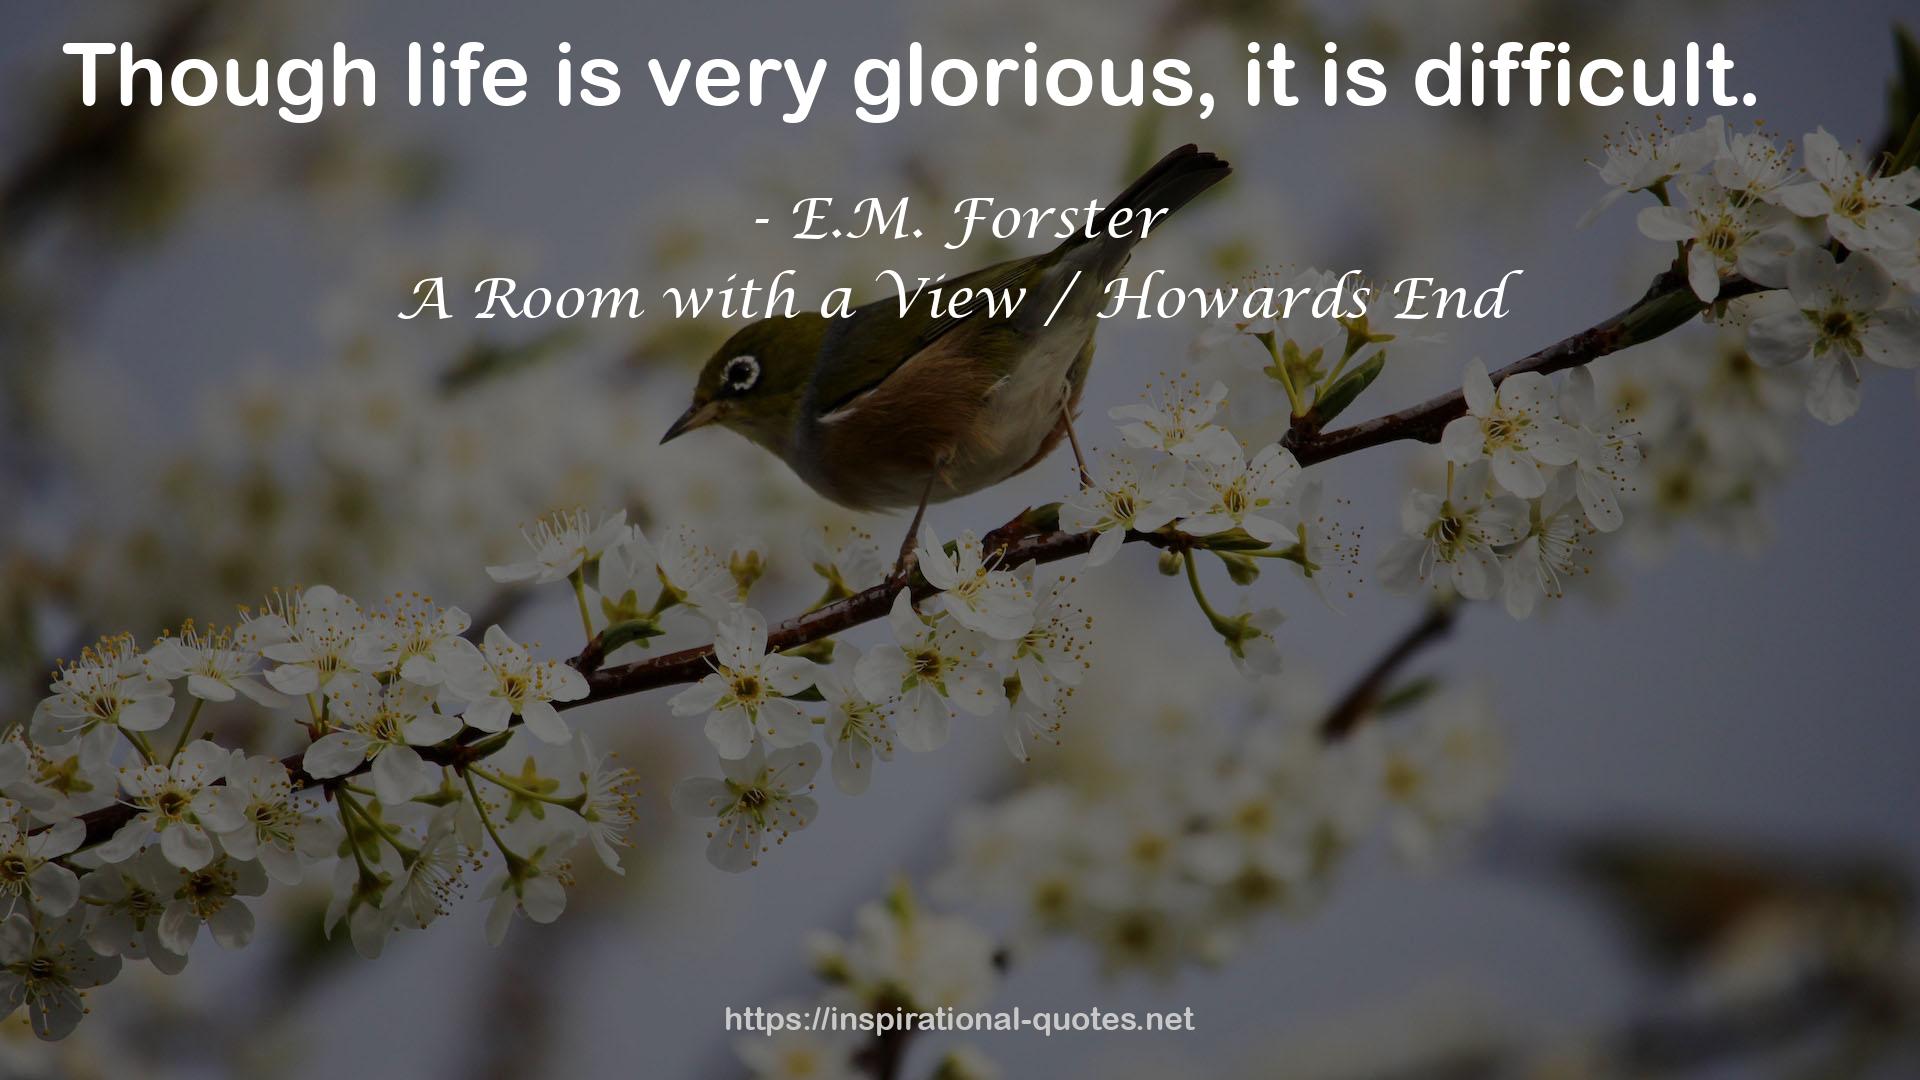 A Room with a View / Howards End QUOTES